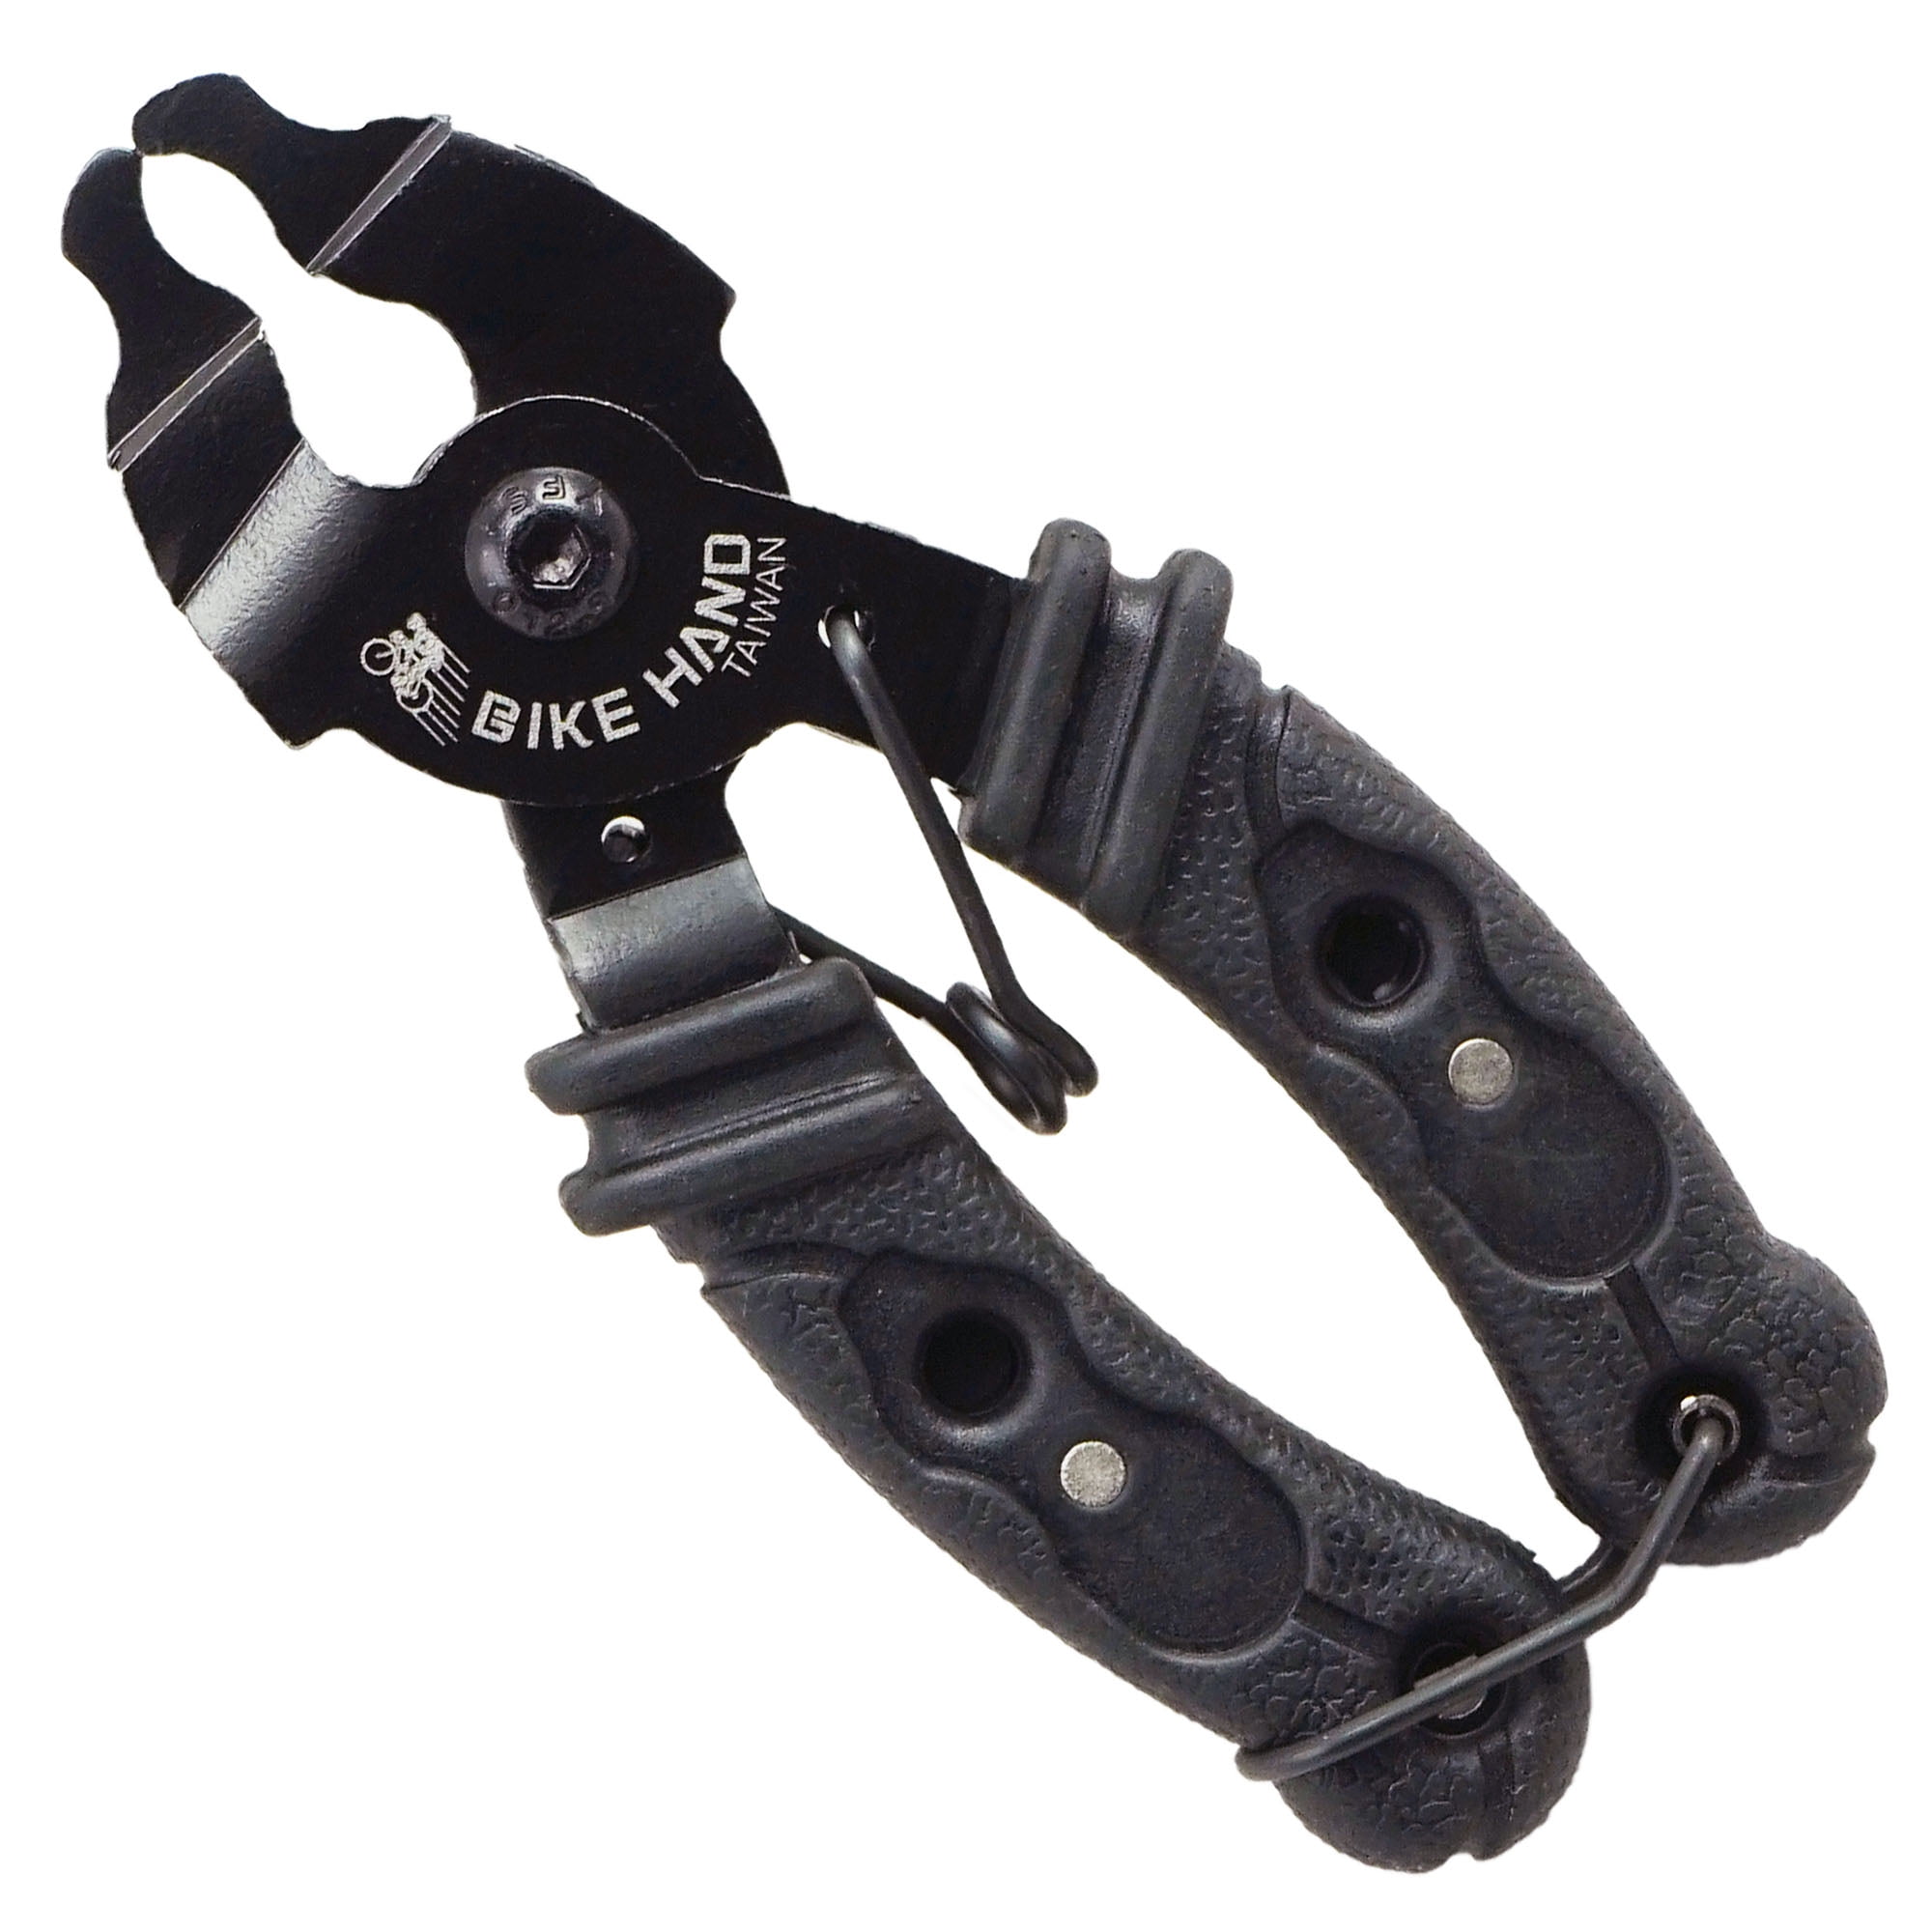 BIKEHAND Bike Bicycle Professional Chain Rivet Tool With Spare Replaceable Pin for sale online 